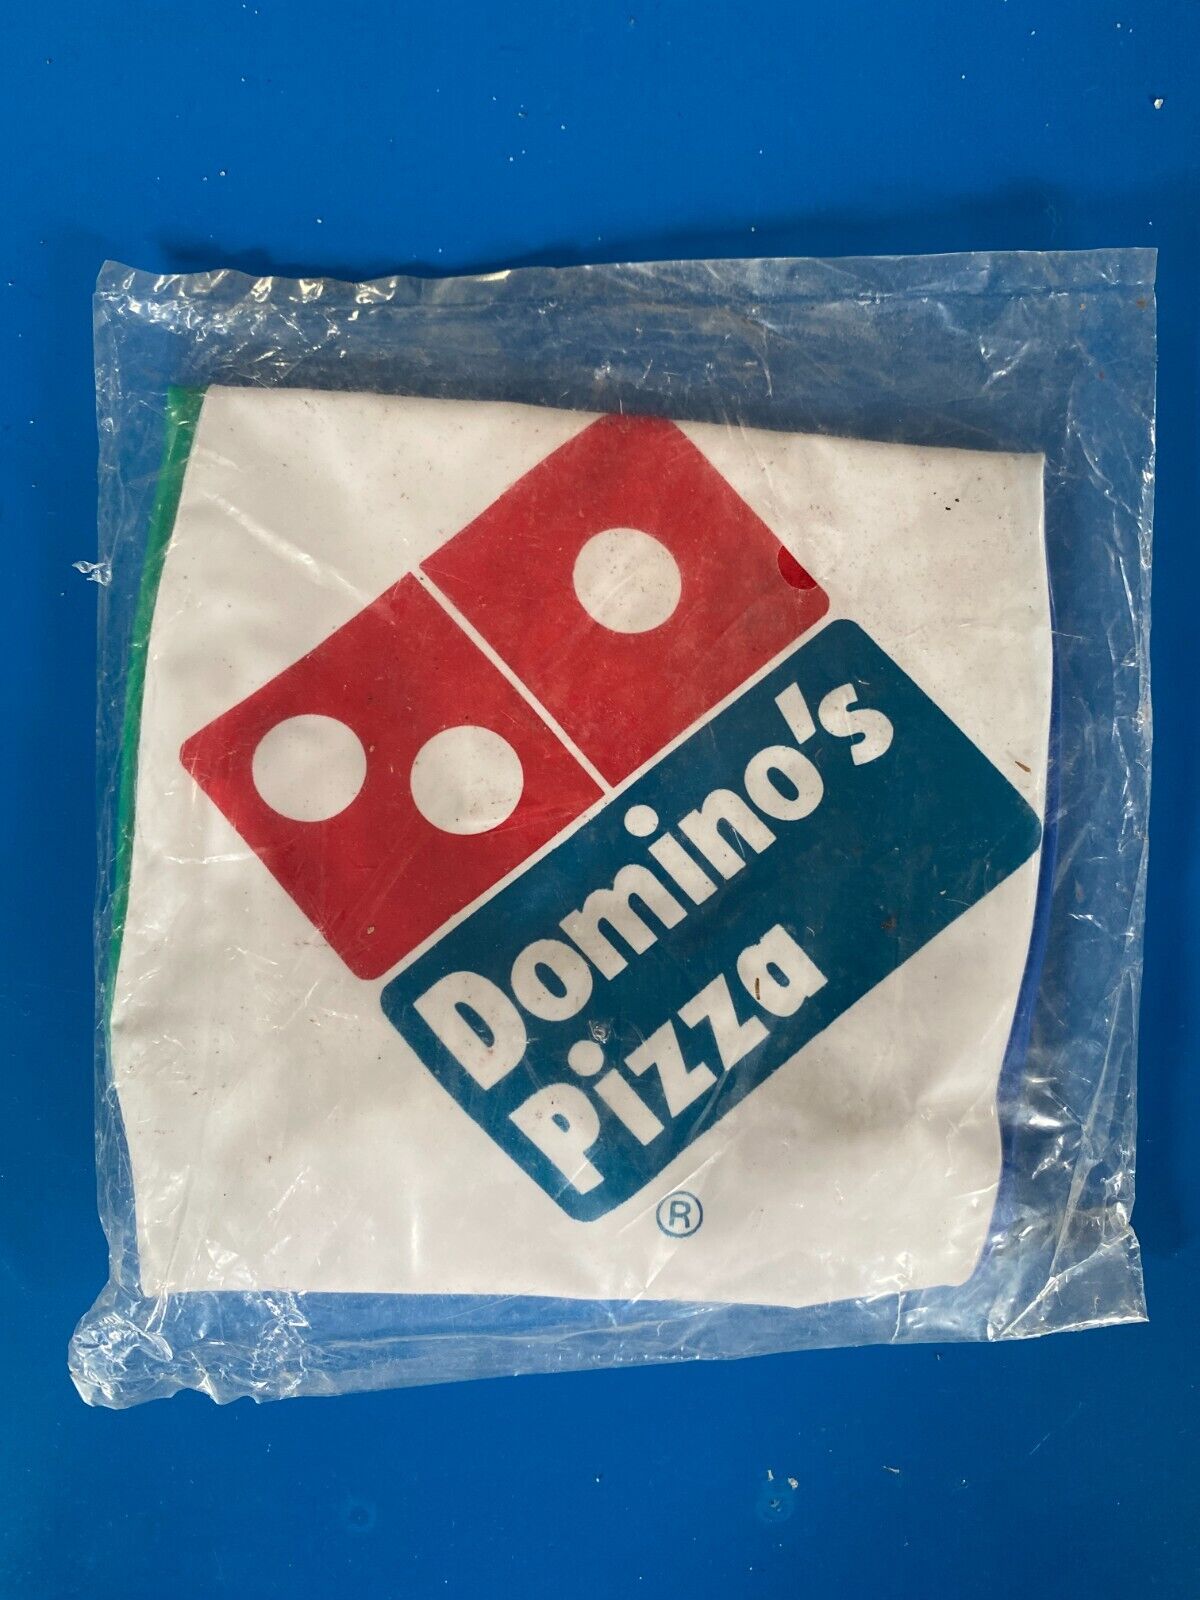 Vintage Domino's Pizza Advertising Inflatable Beach Ball Sealed